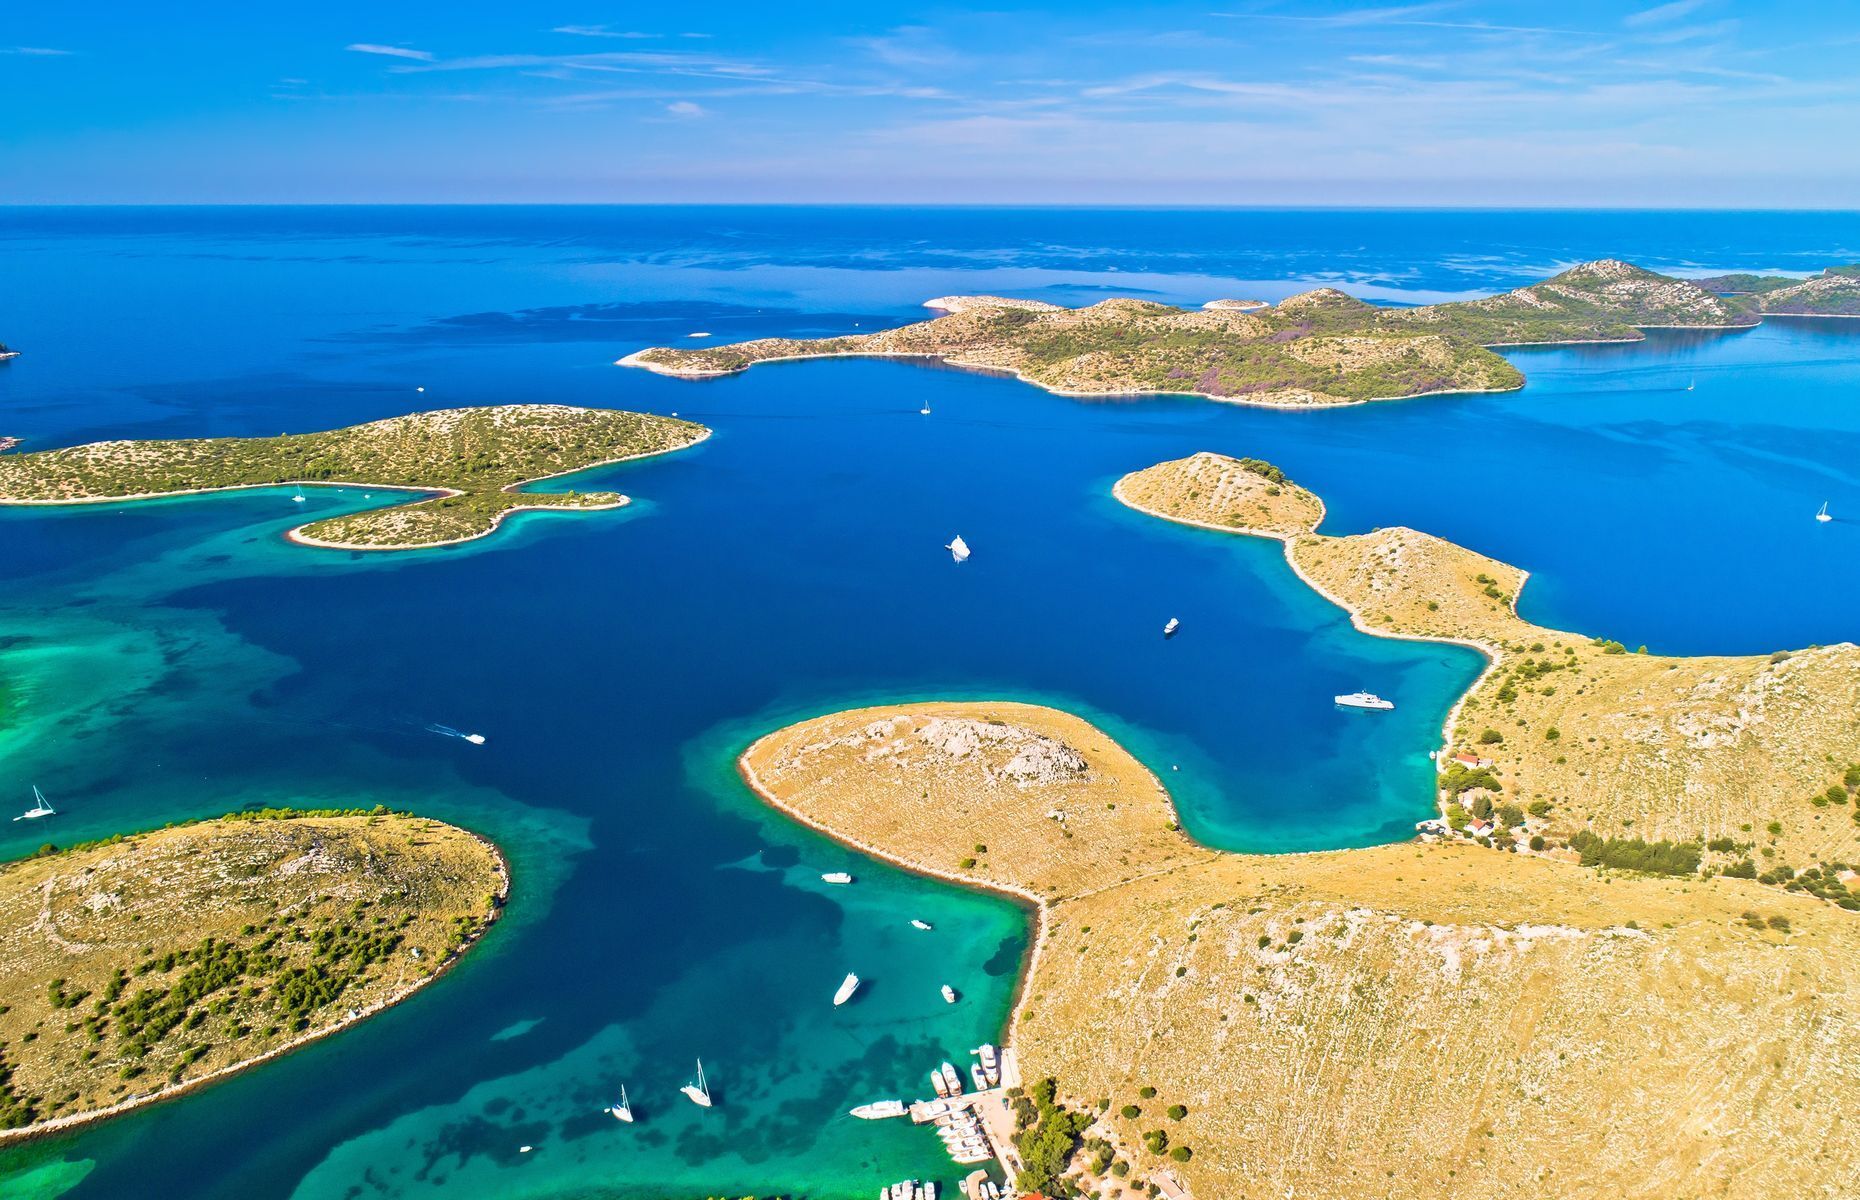 <a href="https://croatia.hr/en-gb/islands/kornati" rel="noreferrer noopener">Kornati National Park’s</a> 89 islands form a marine labyrinth in the middle of the Adriatic Sea off the Dalmatian coast. Its isolated location, Mediterranean climate, and wild, rugged landscape make it a magical destination for nature lovers. In addition to breathtaking hikes, intrepid travellers can also enjoy diving and boating. Visit traditional fishing villages as well to sample local specialties.